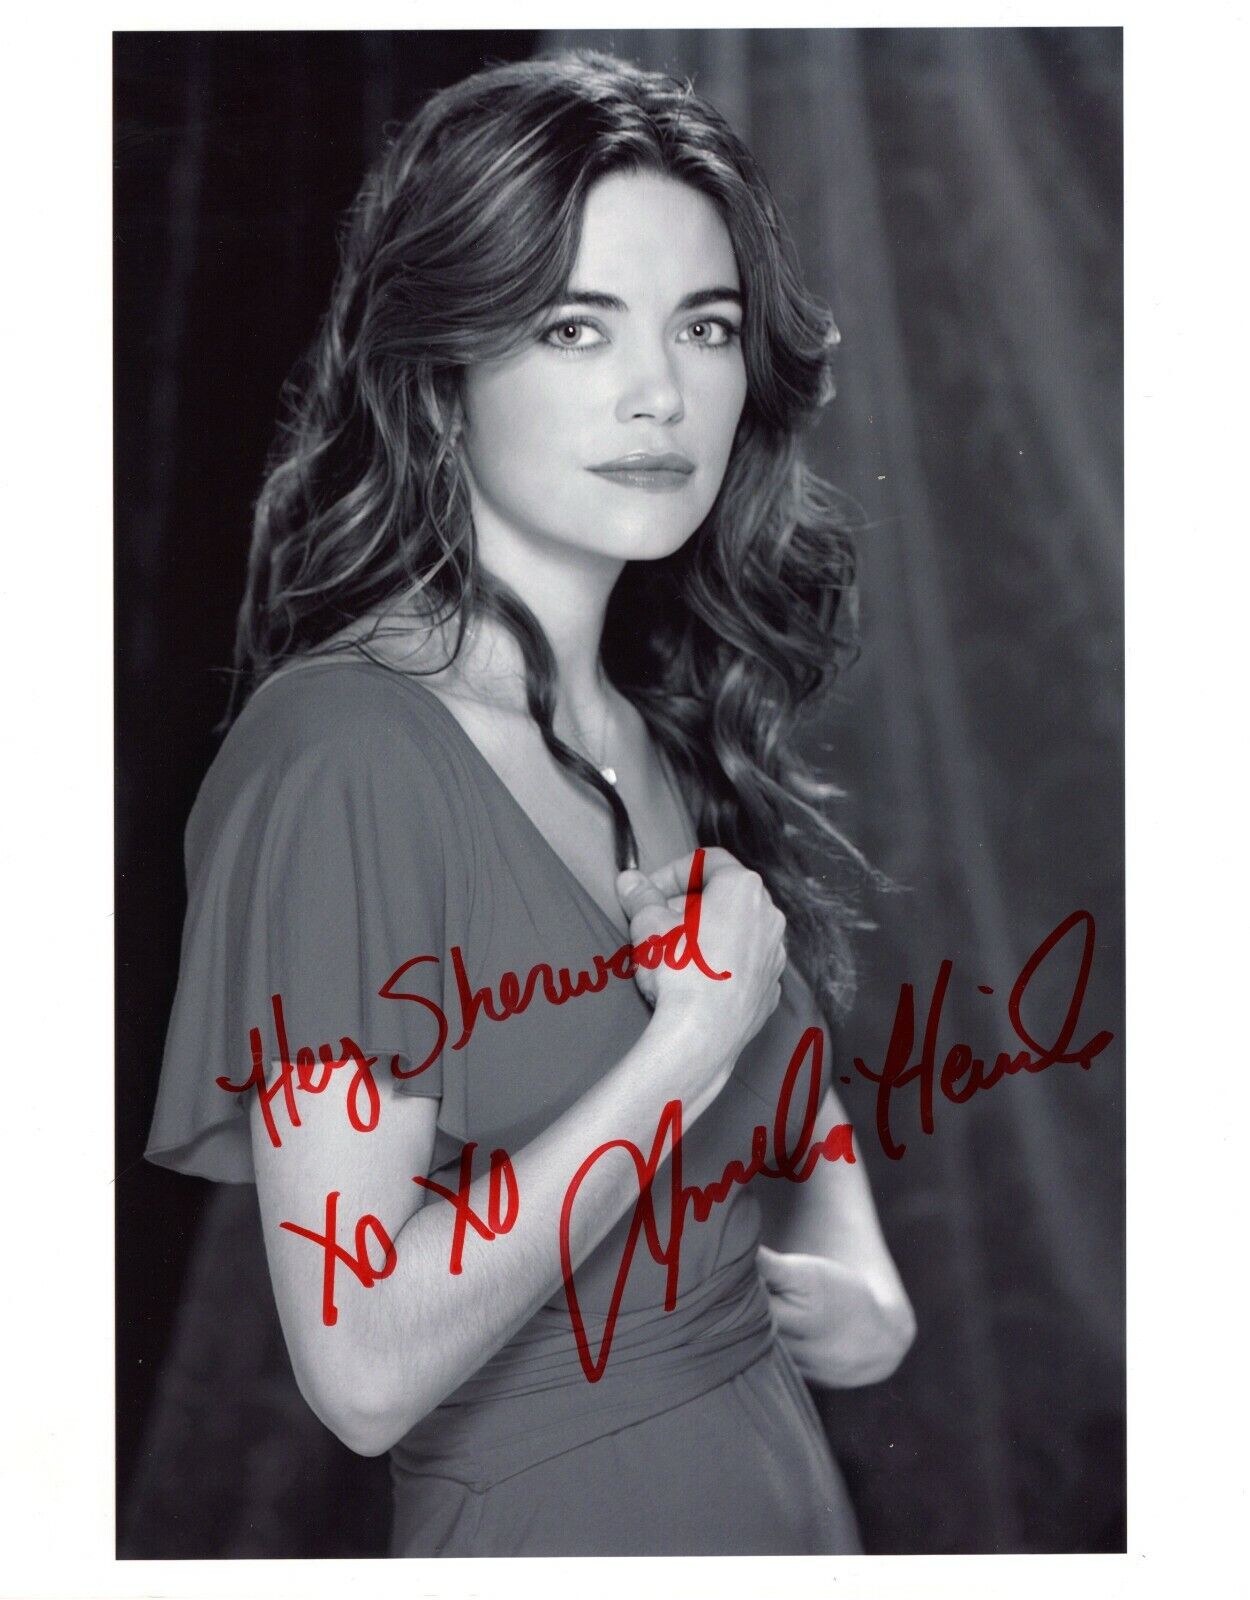 Amelia Heinle The Young & The Restless Actress Signed Autograph 8x10 Photo Poster painting